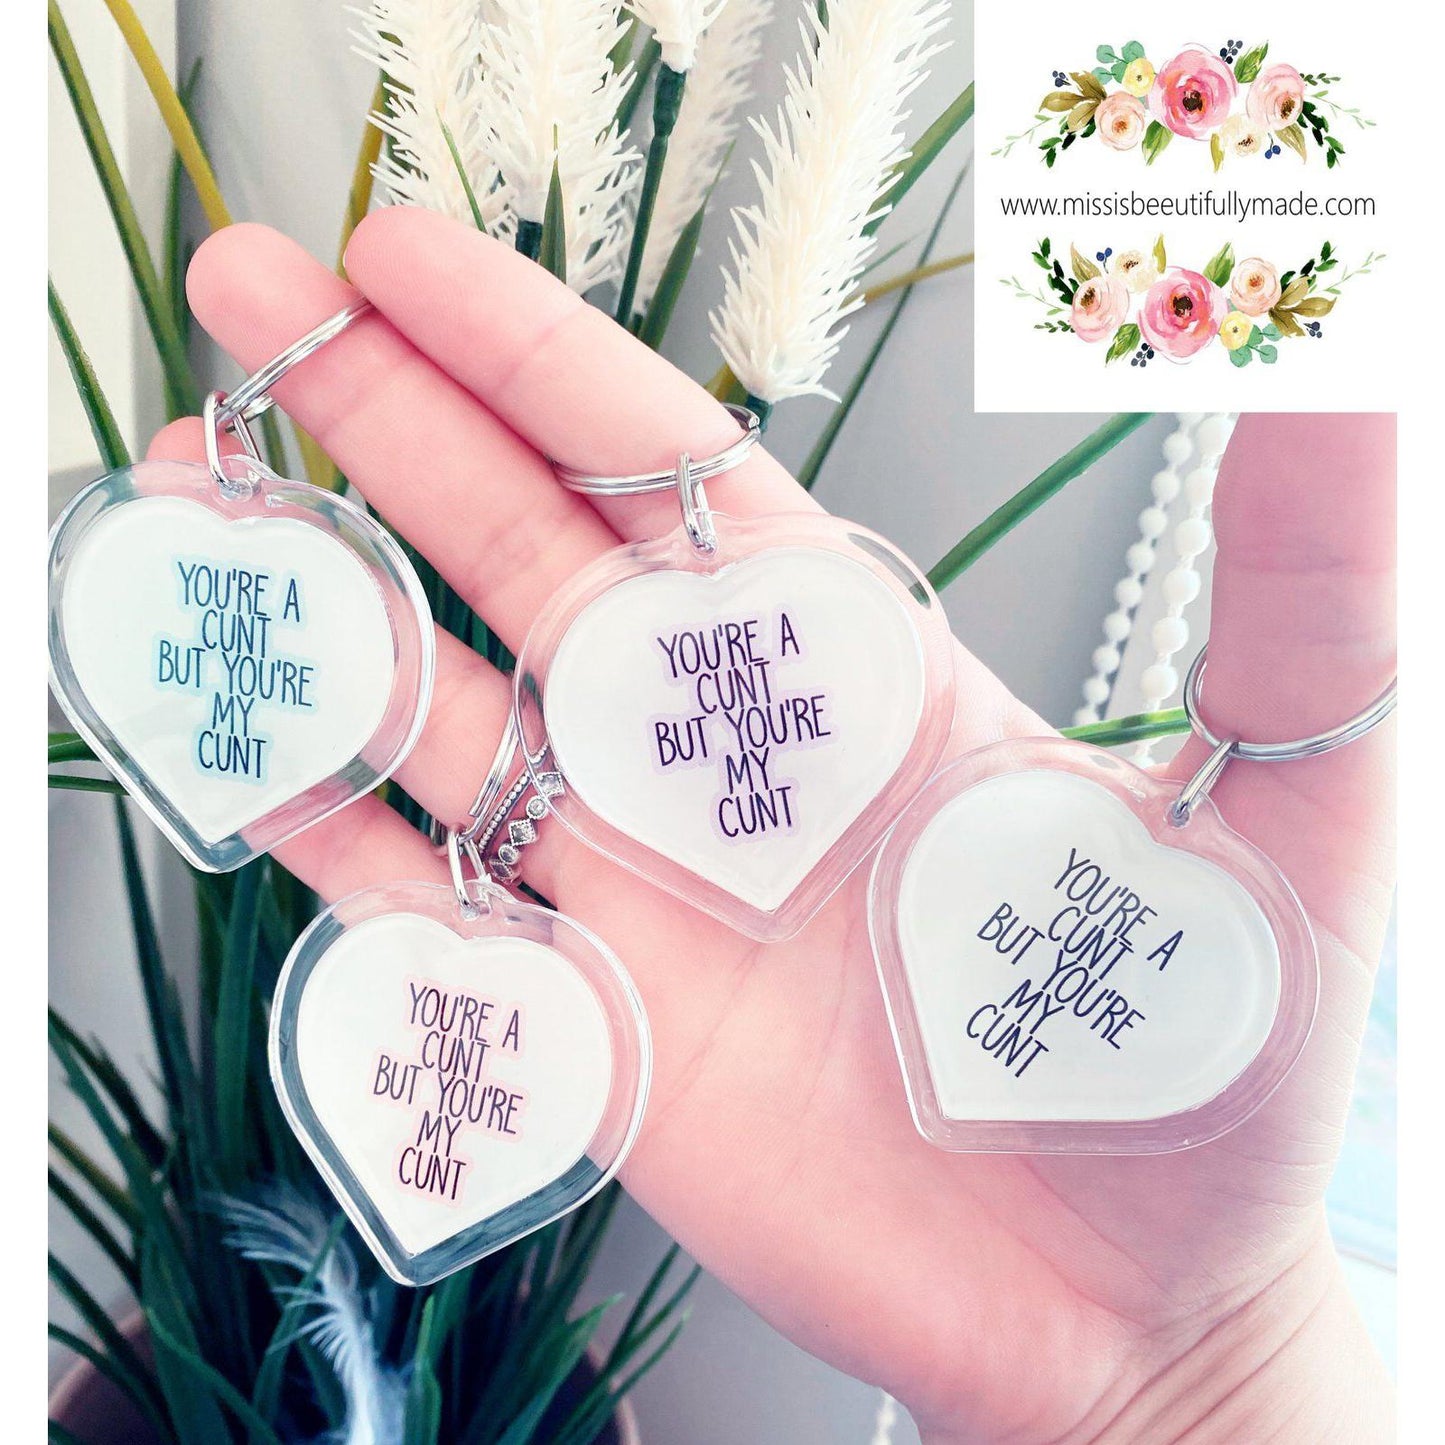 4 Acrylic heart keyrings featuring the funny design 'you're a c*nt, but you'r my c*nt', printed in blue, purple, pink & white.